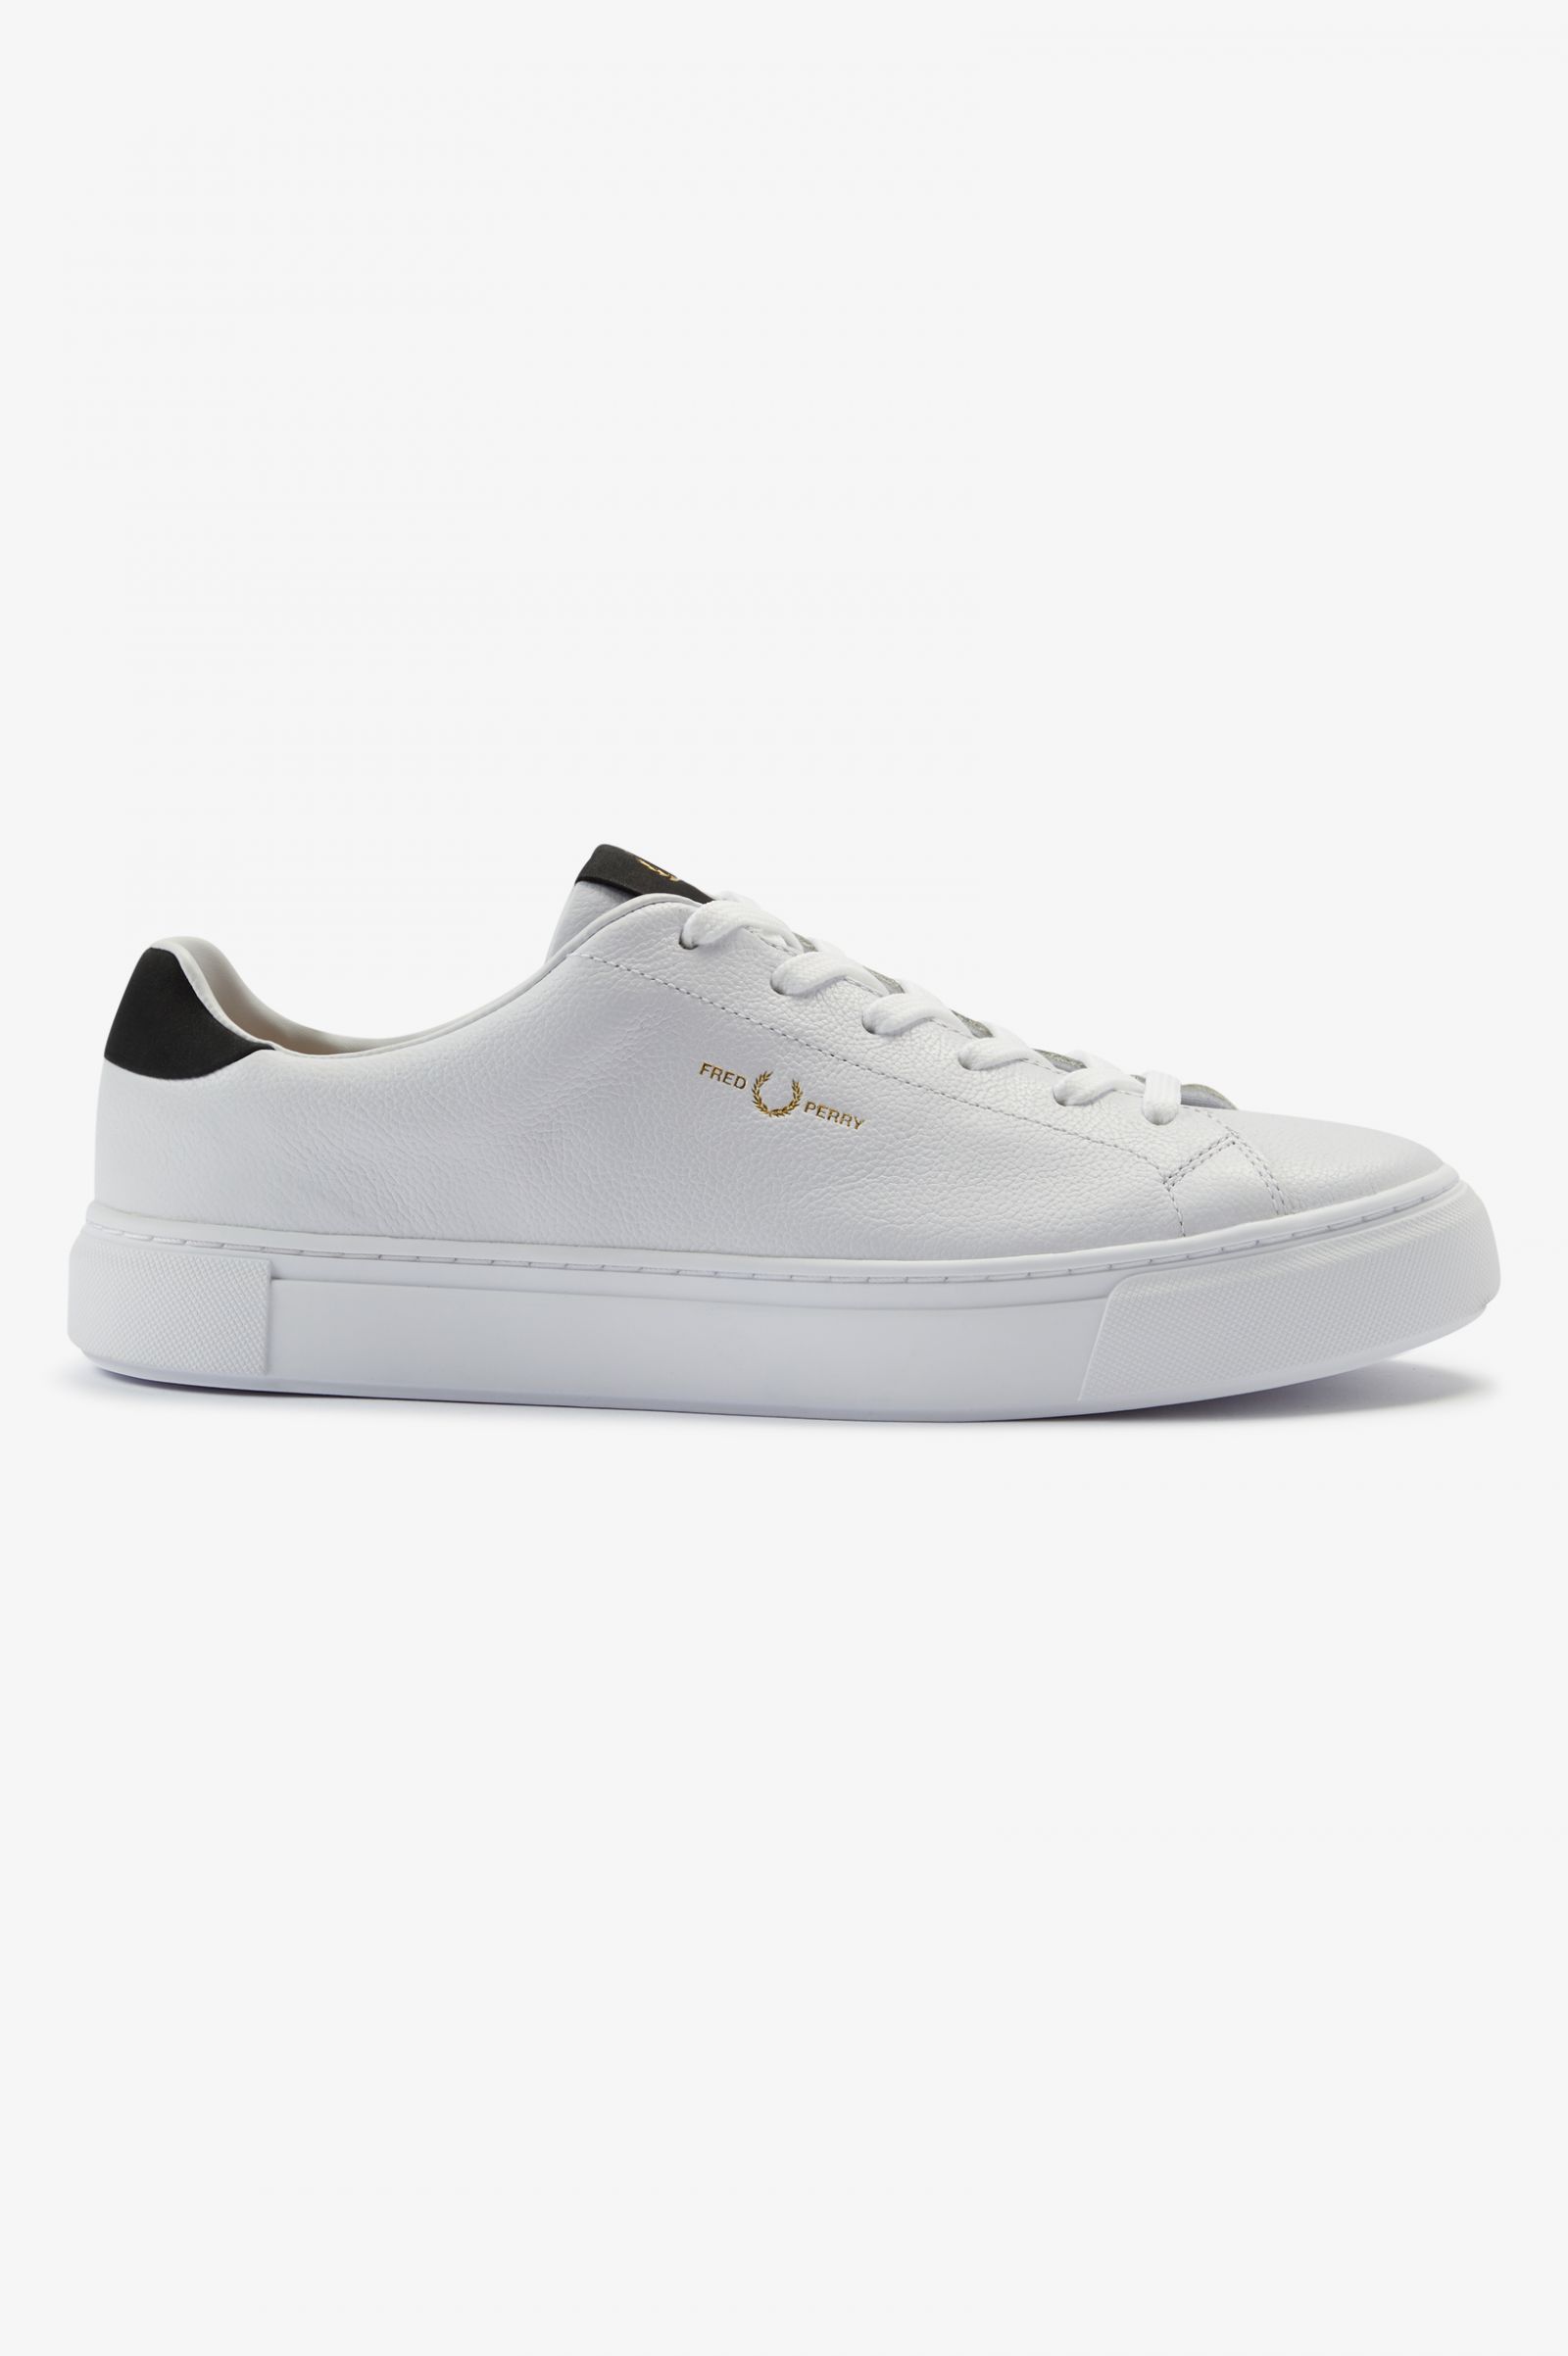 B71 Tumbled Leather | Fred Perry